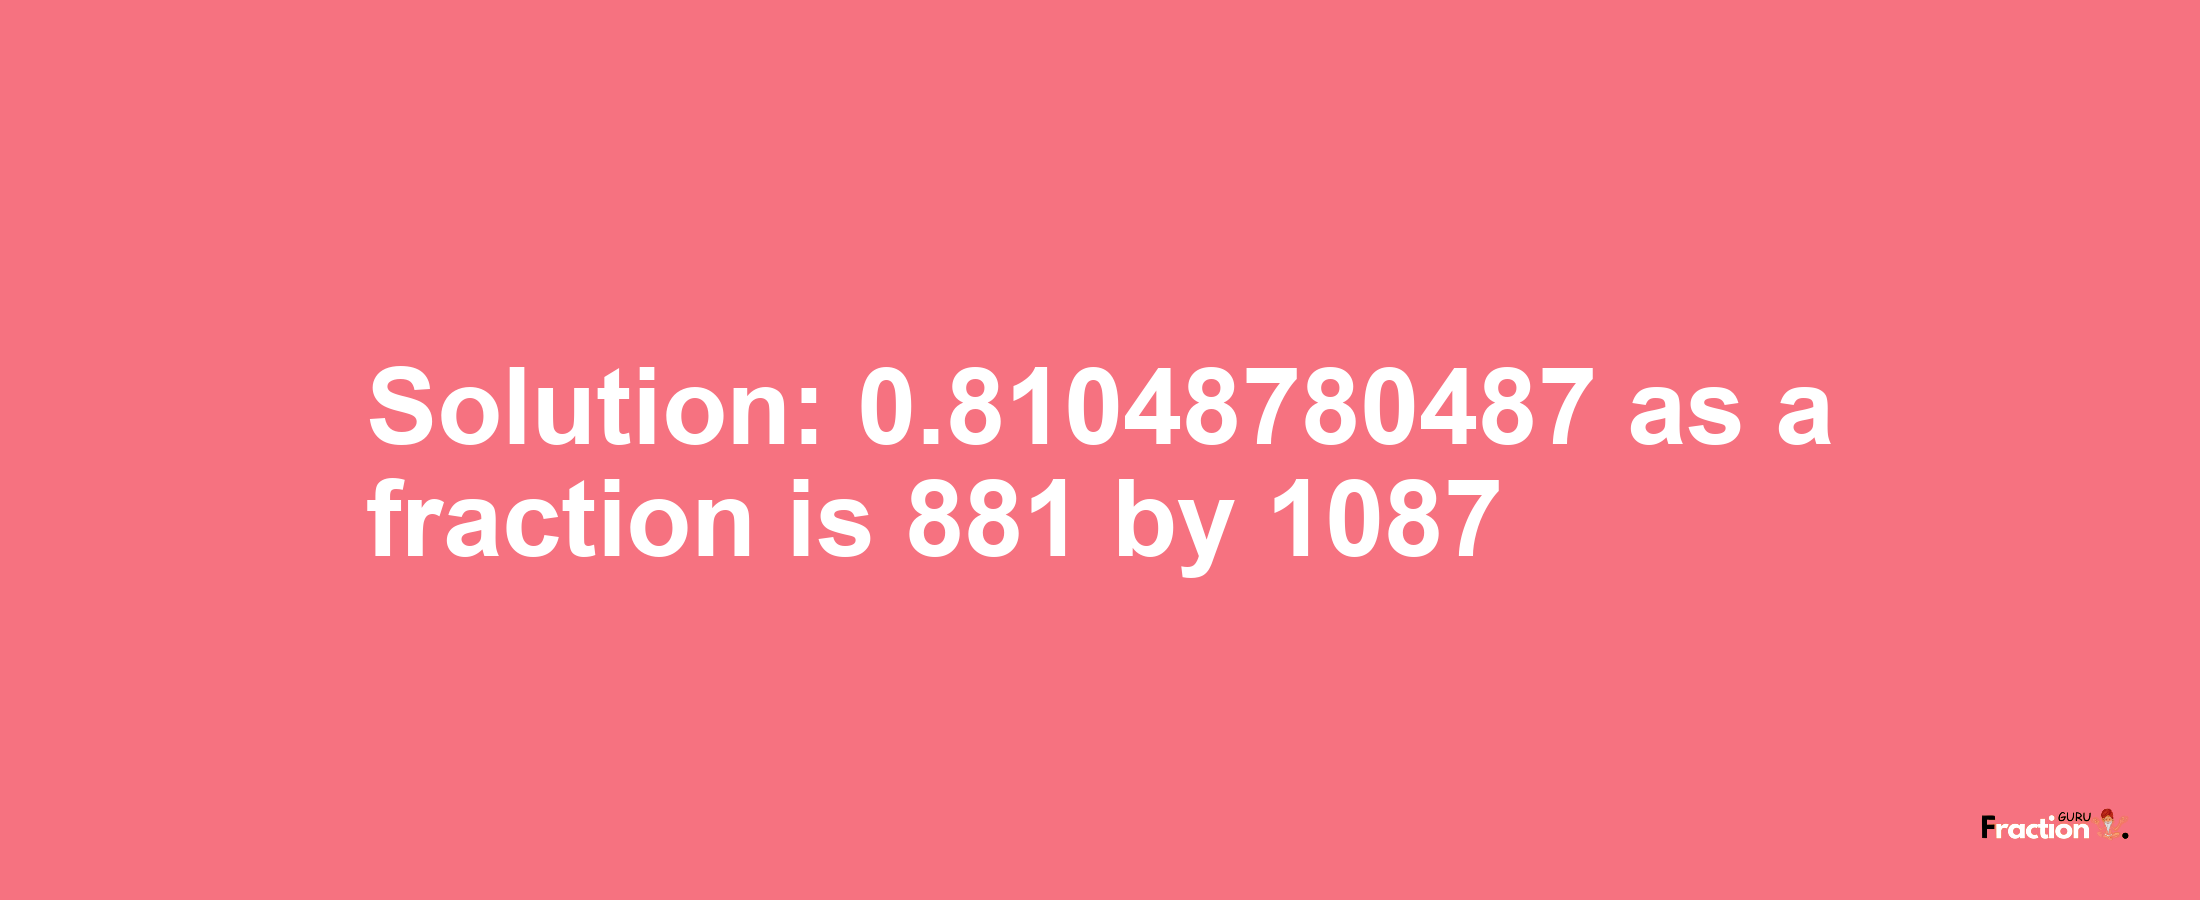 Solution:0.81048780487 as a fraction is 881/1087